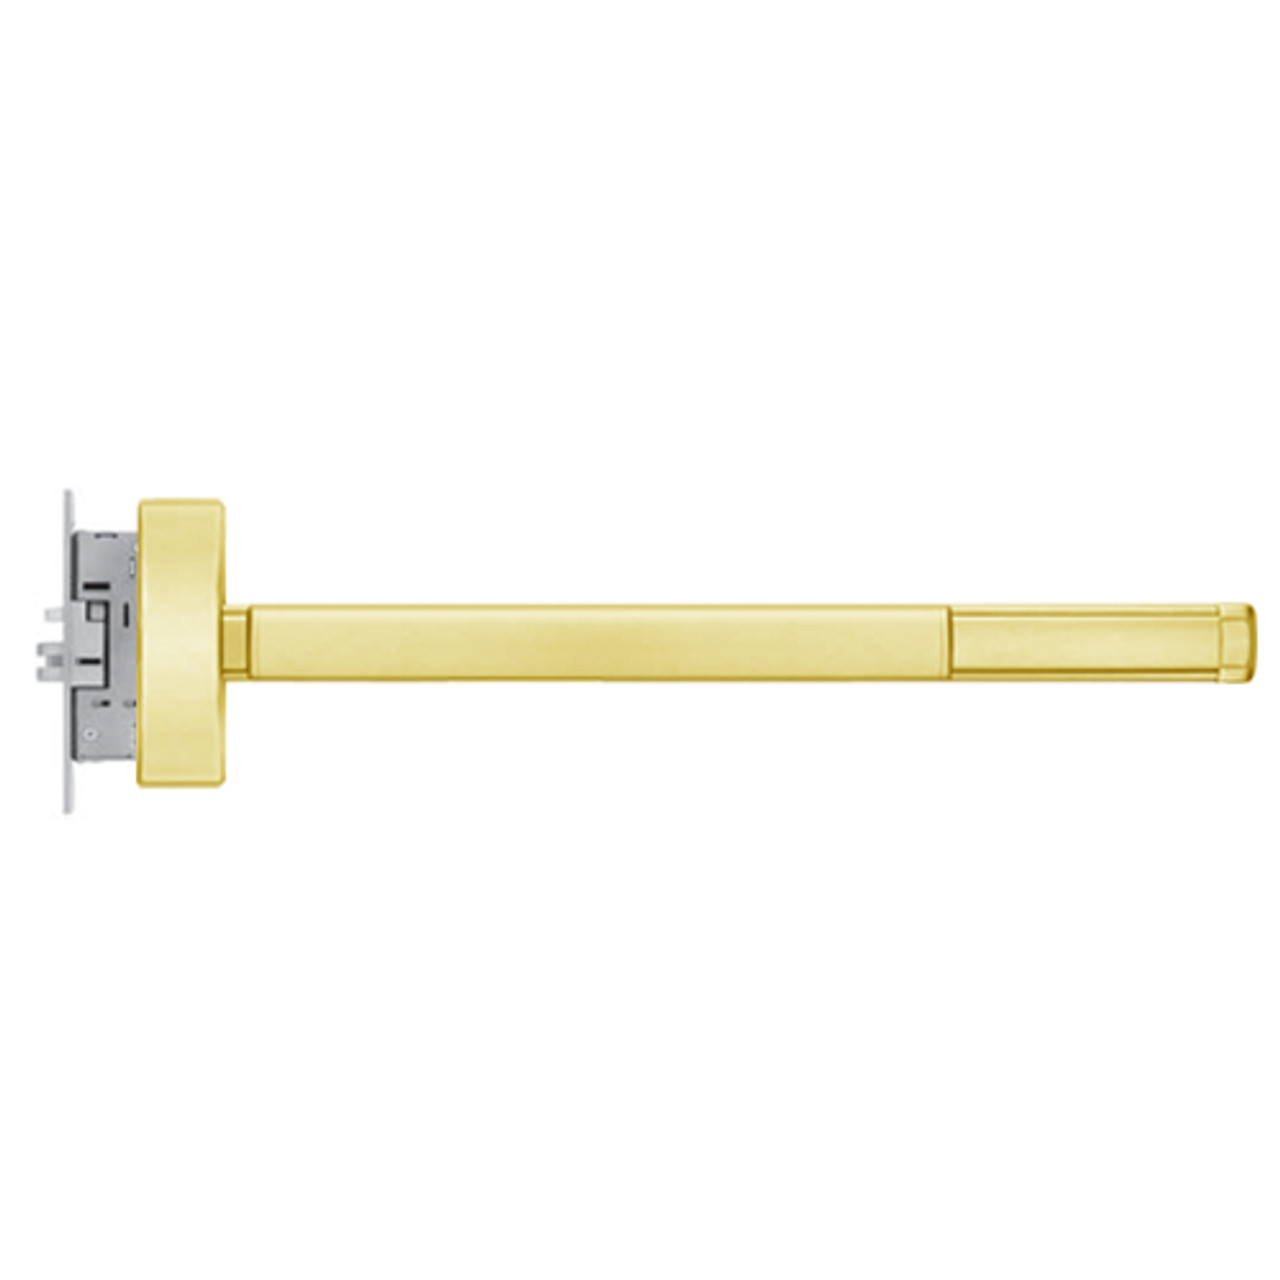 ELRFL2301-RHR-605-48 PHI 2300 Series Fire Rated Apex Mortise Exit Device with Electric Latch Retraction Prepped for Cover Plate in Bright Brass Finish